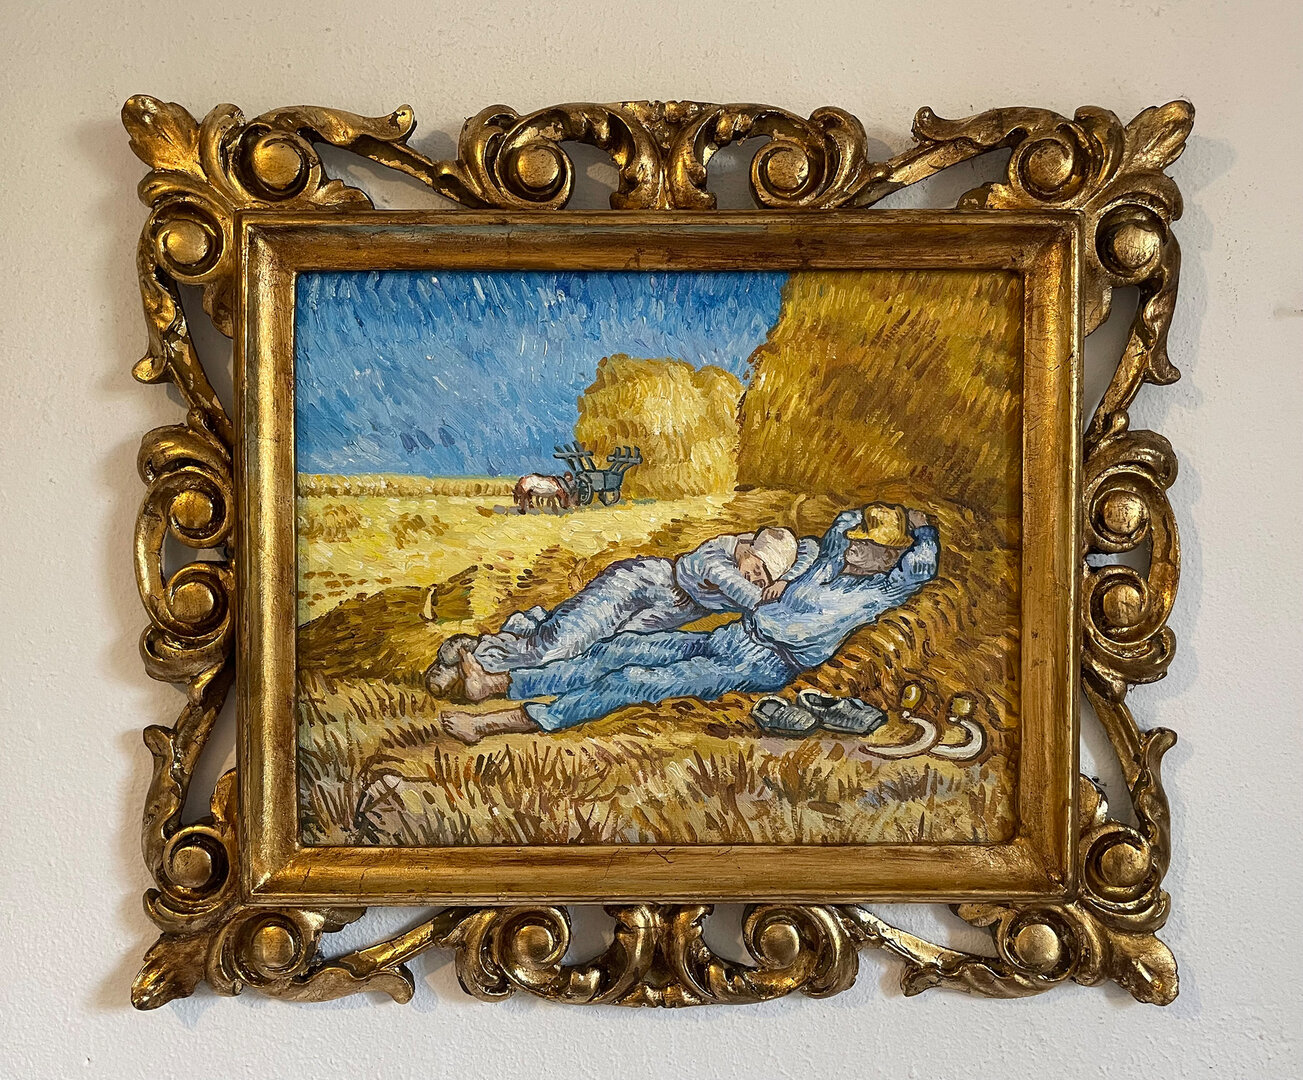 small Noon, Rest from Work replica with antique rococo frame